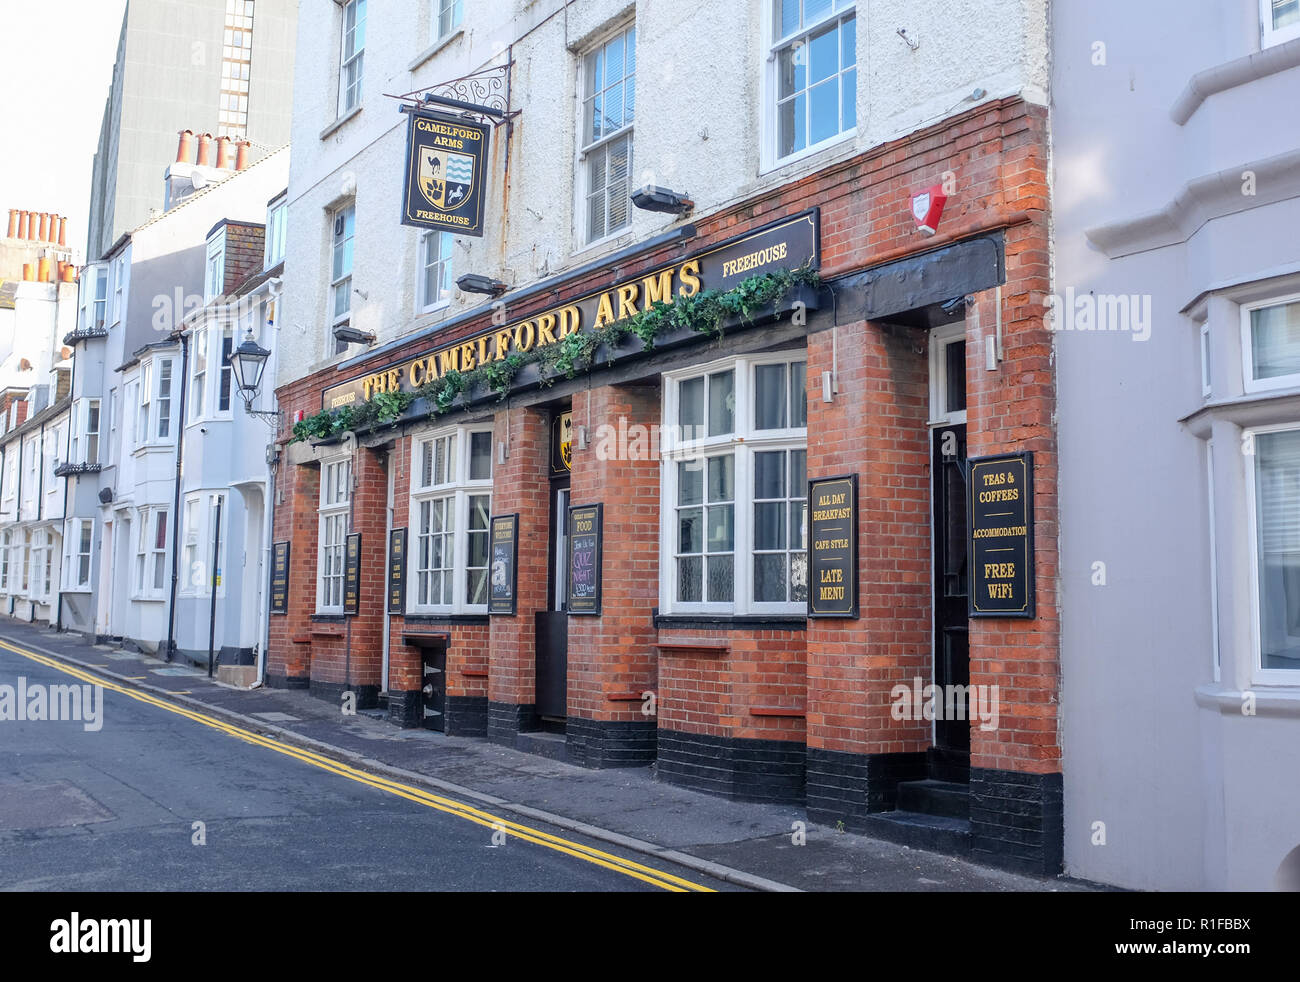 The Camelford Arms pub in camel ford Street Kemp Town Brighton UK Stock Photo